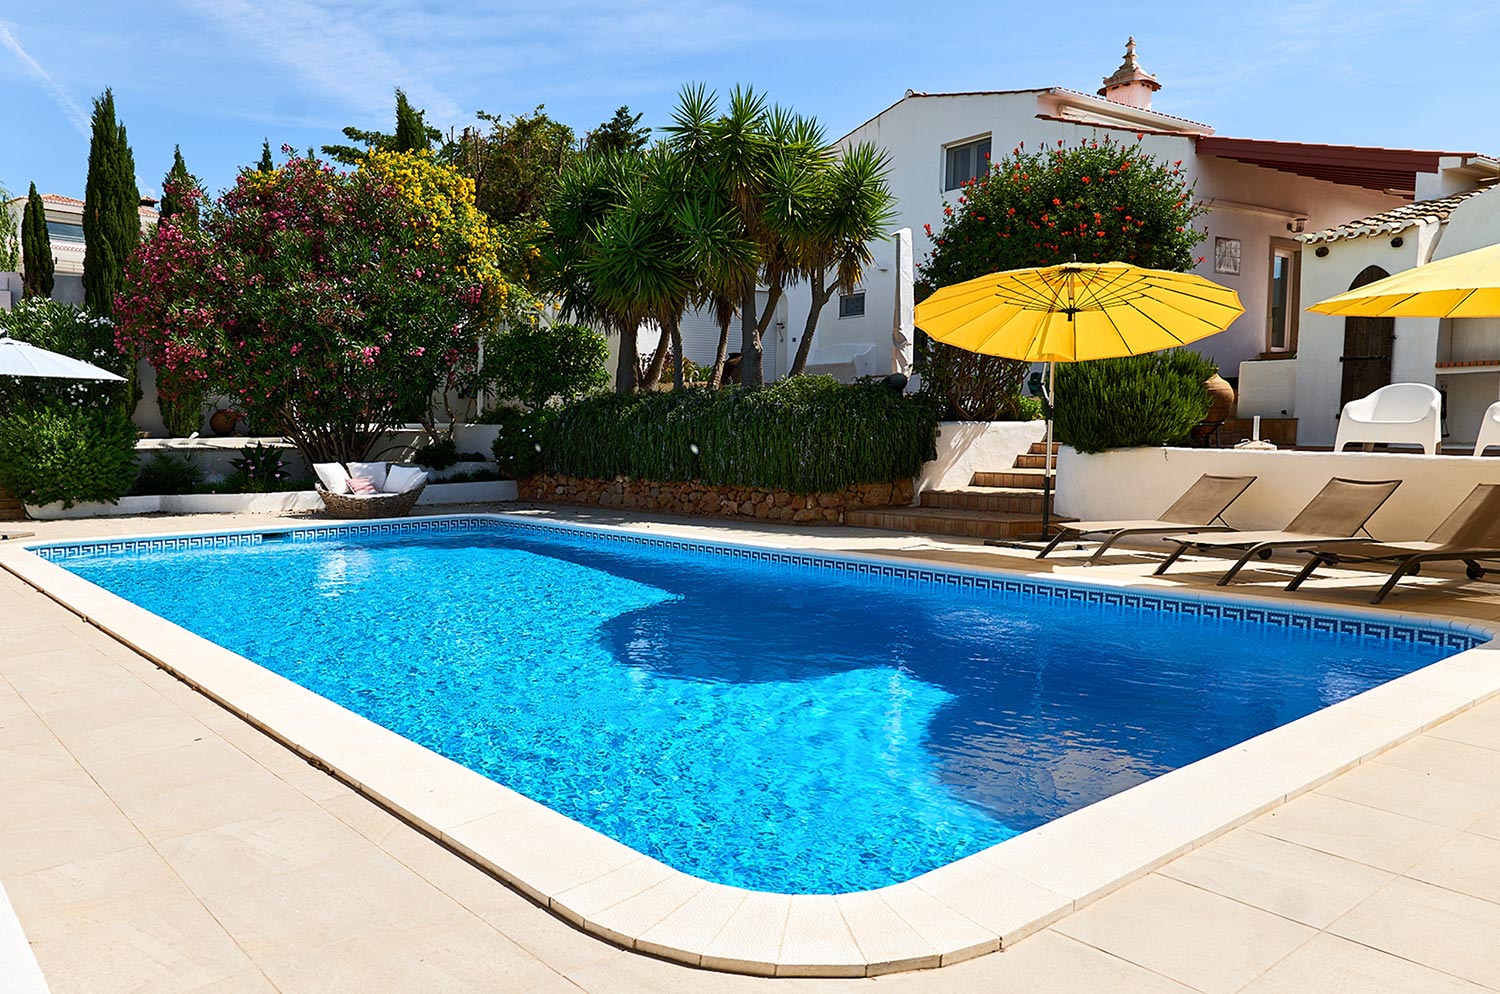 Algarve holiday with dog - holidayhome in Boliqueime